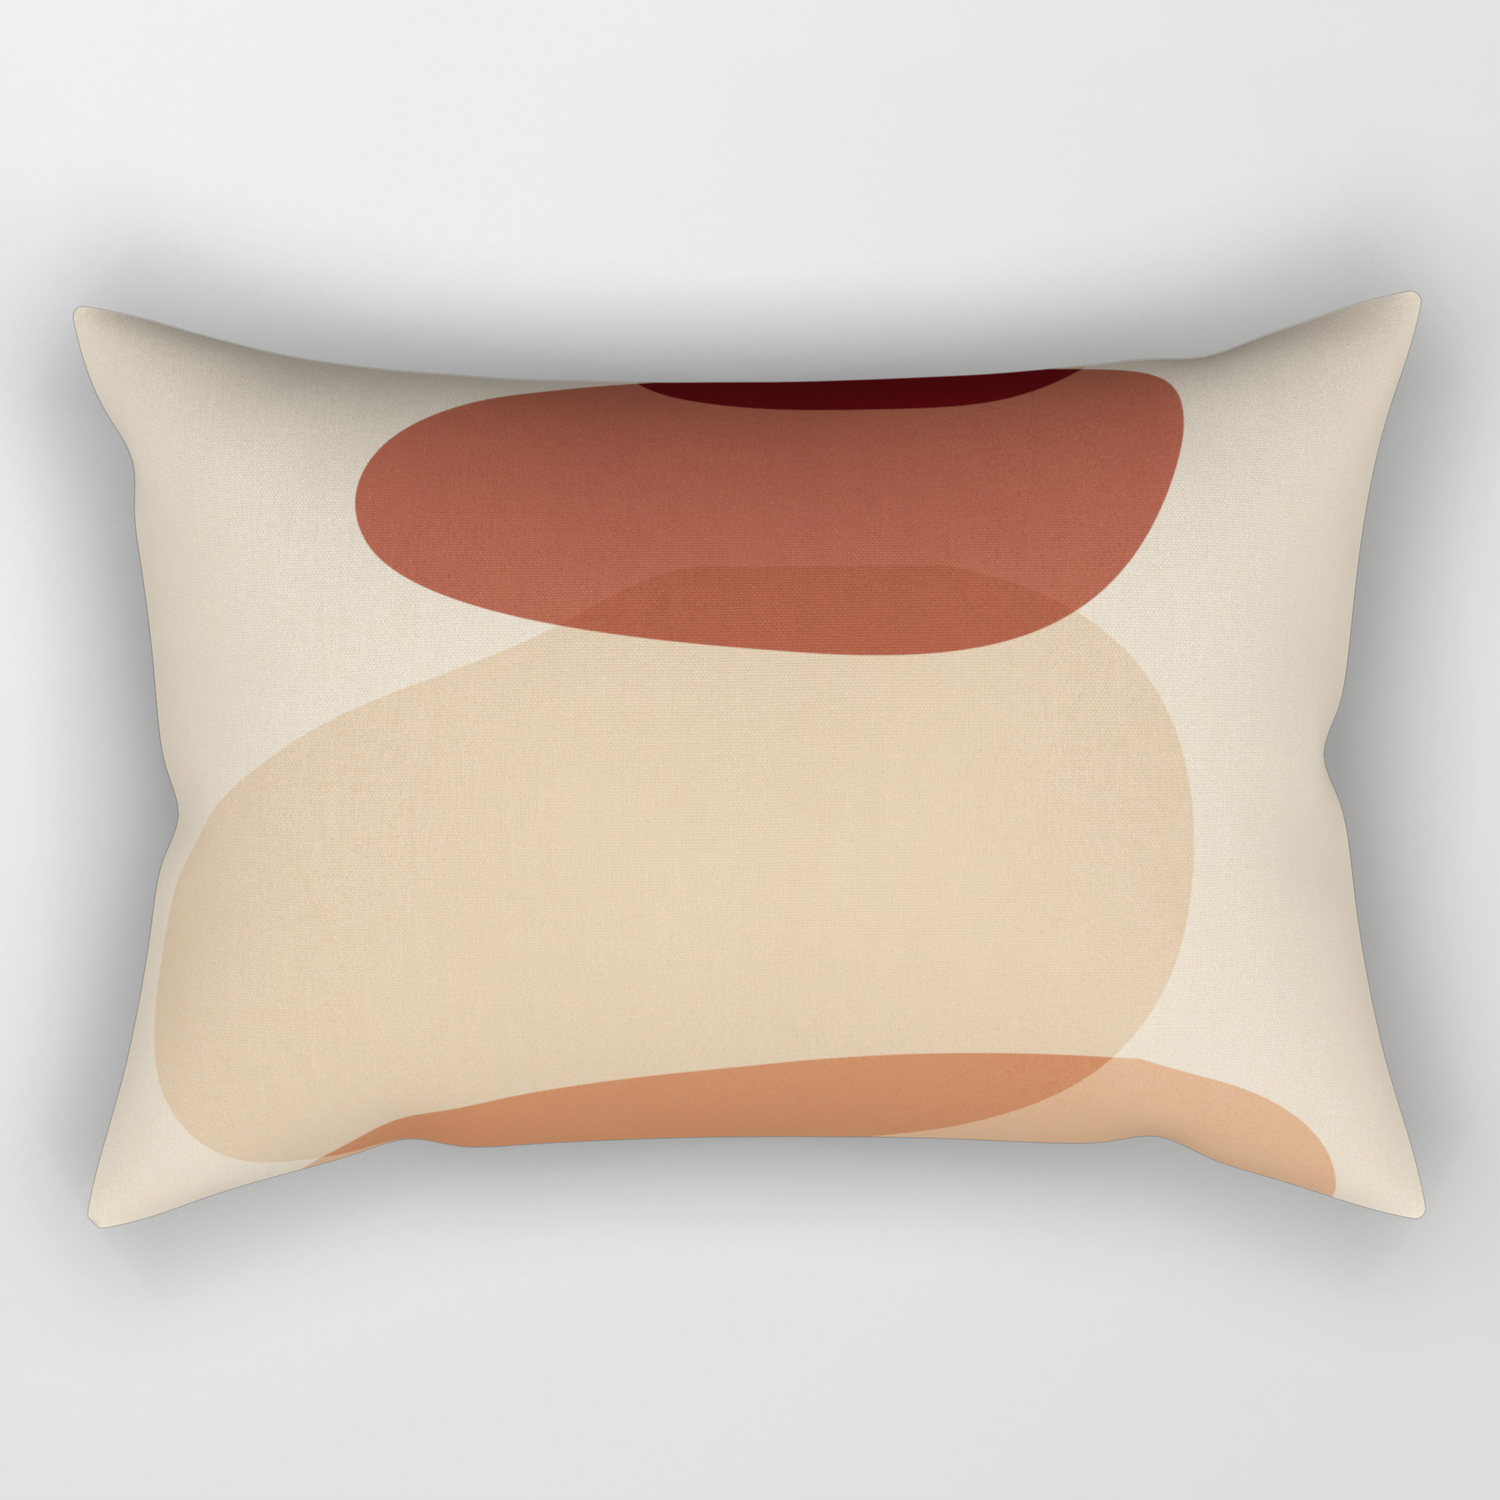 Small 17 x 12 Abstract Shapes 20 by Thingdesign on Rectangular Pillow 